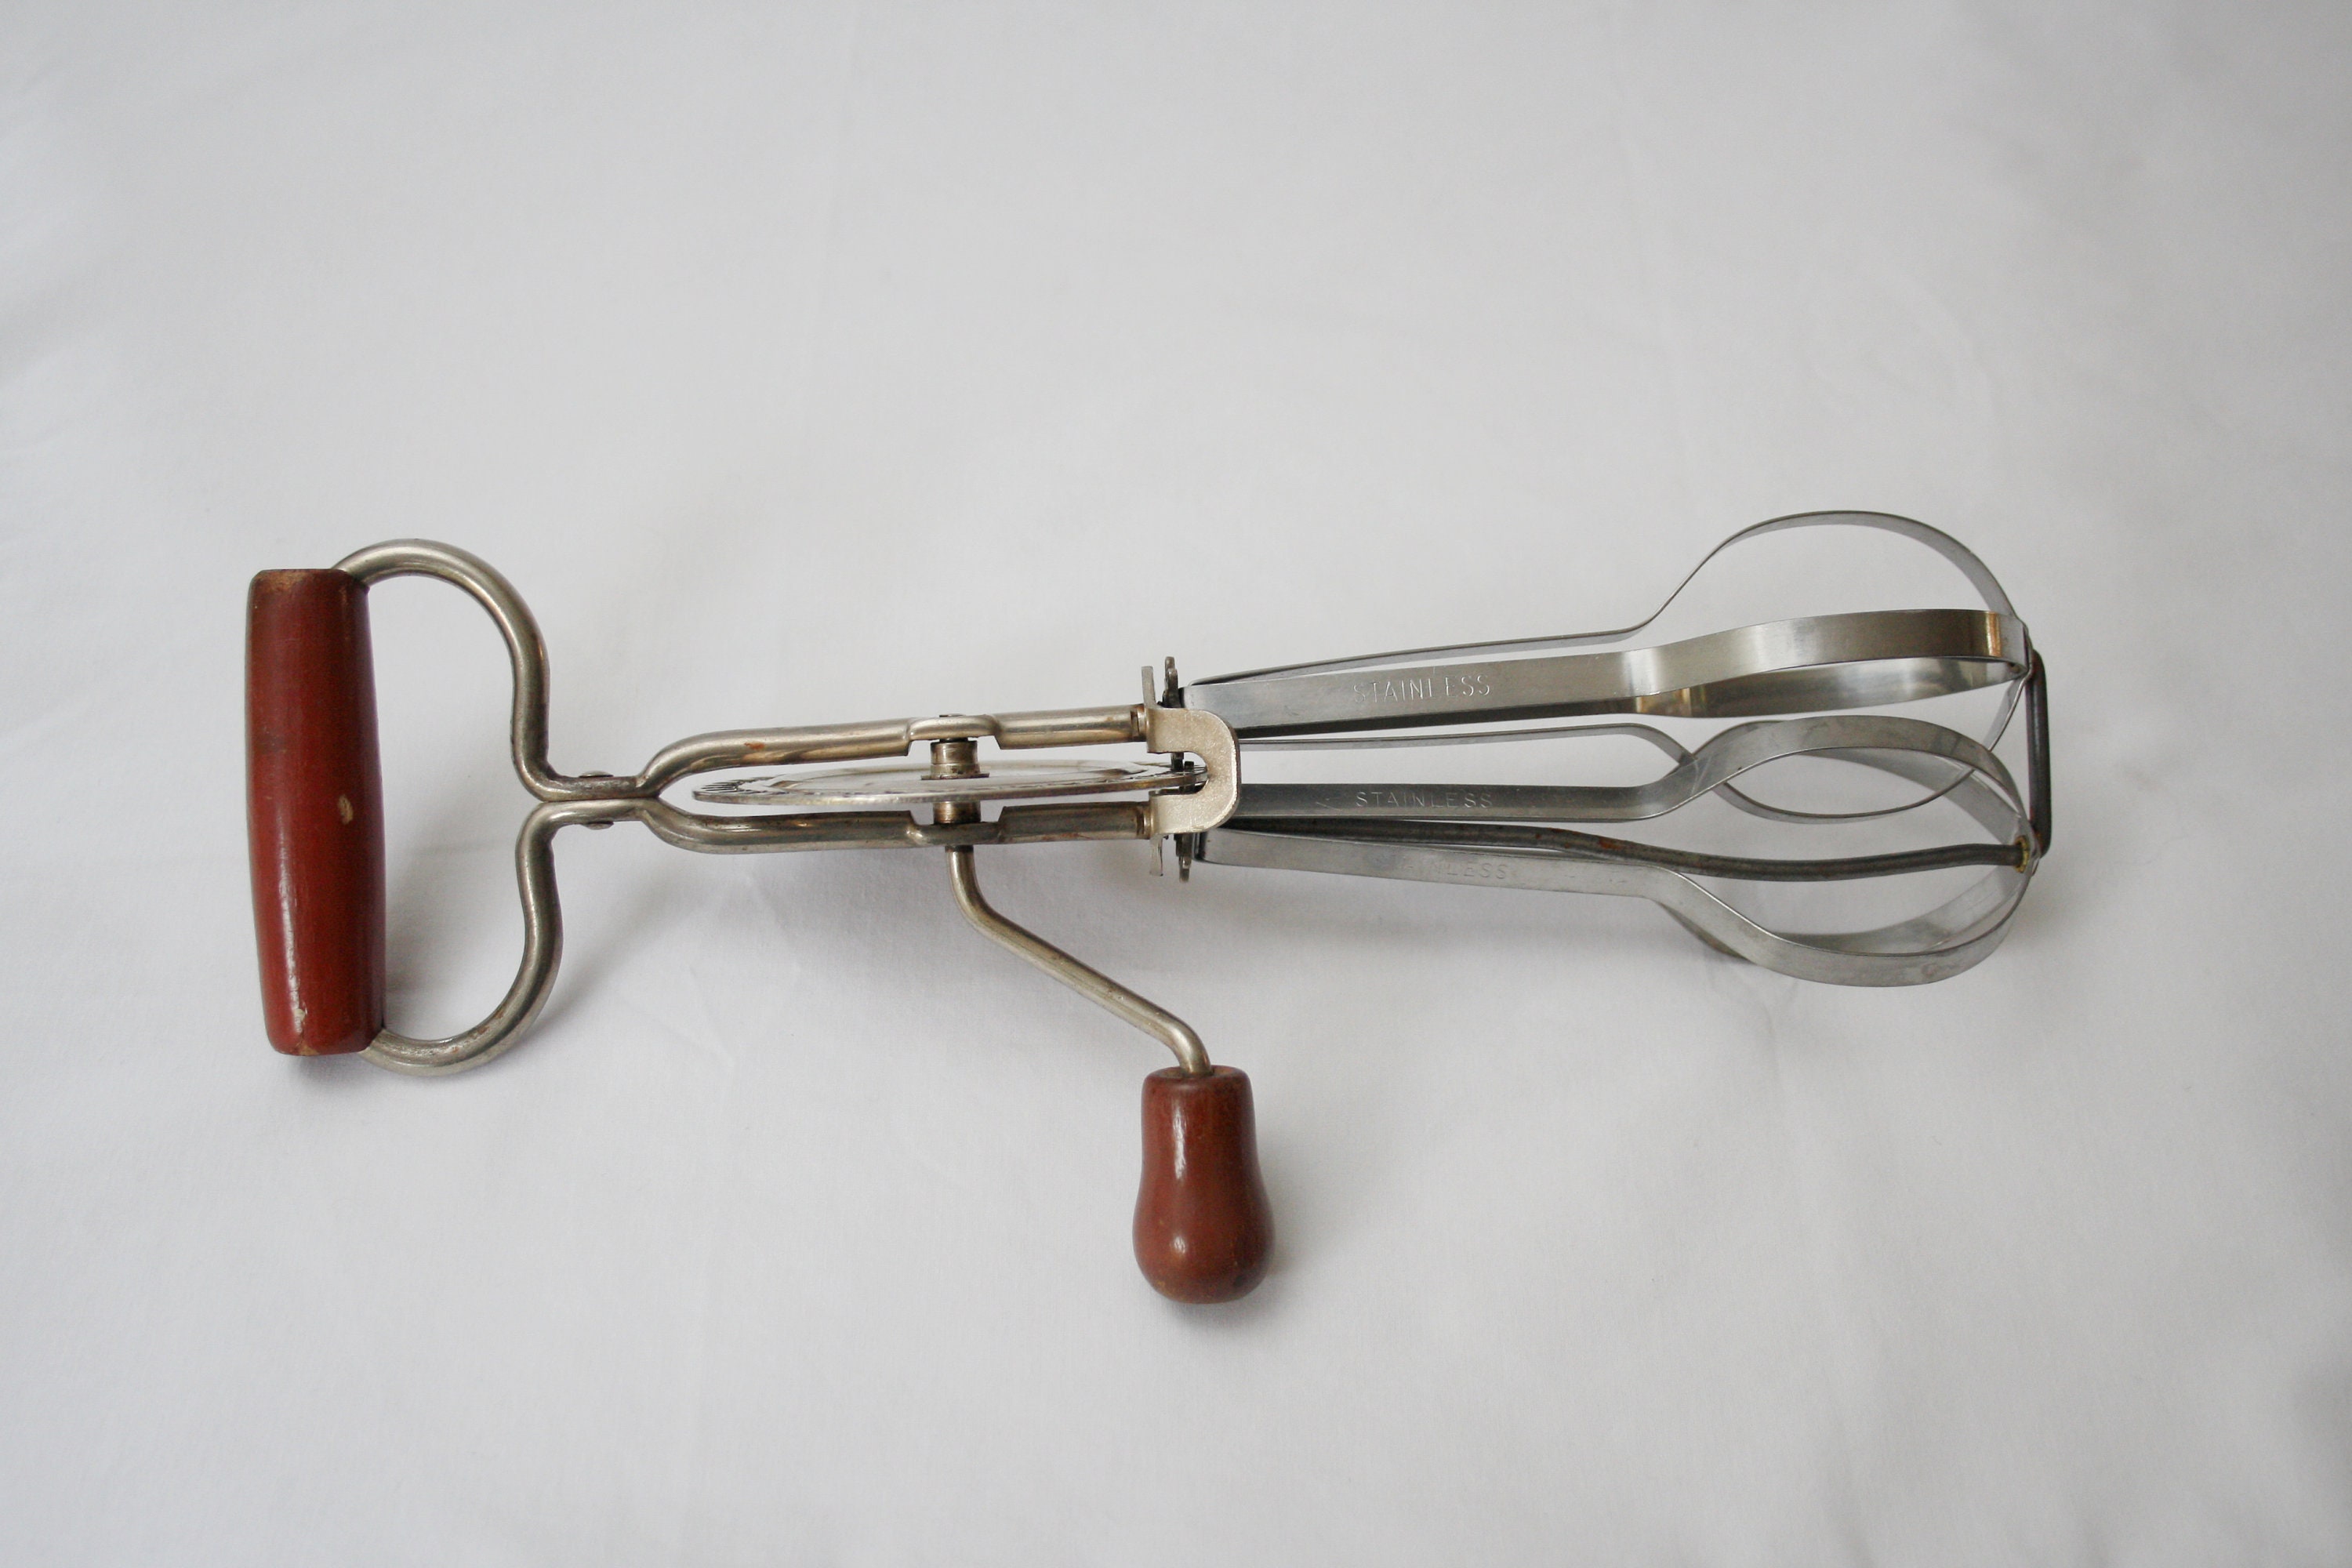  Old Fashioned Amish Crafted Manual Hand Beater - Vintage Style!  Proudly Made in The USA!: Home & Kitchen